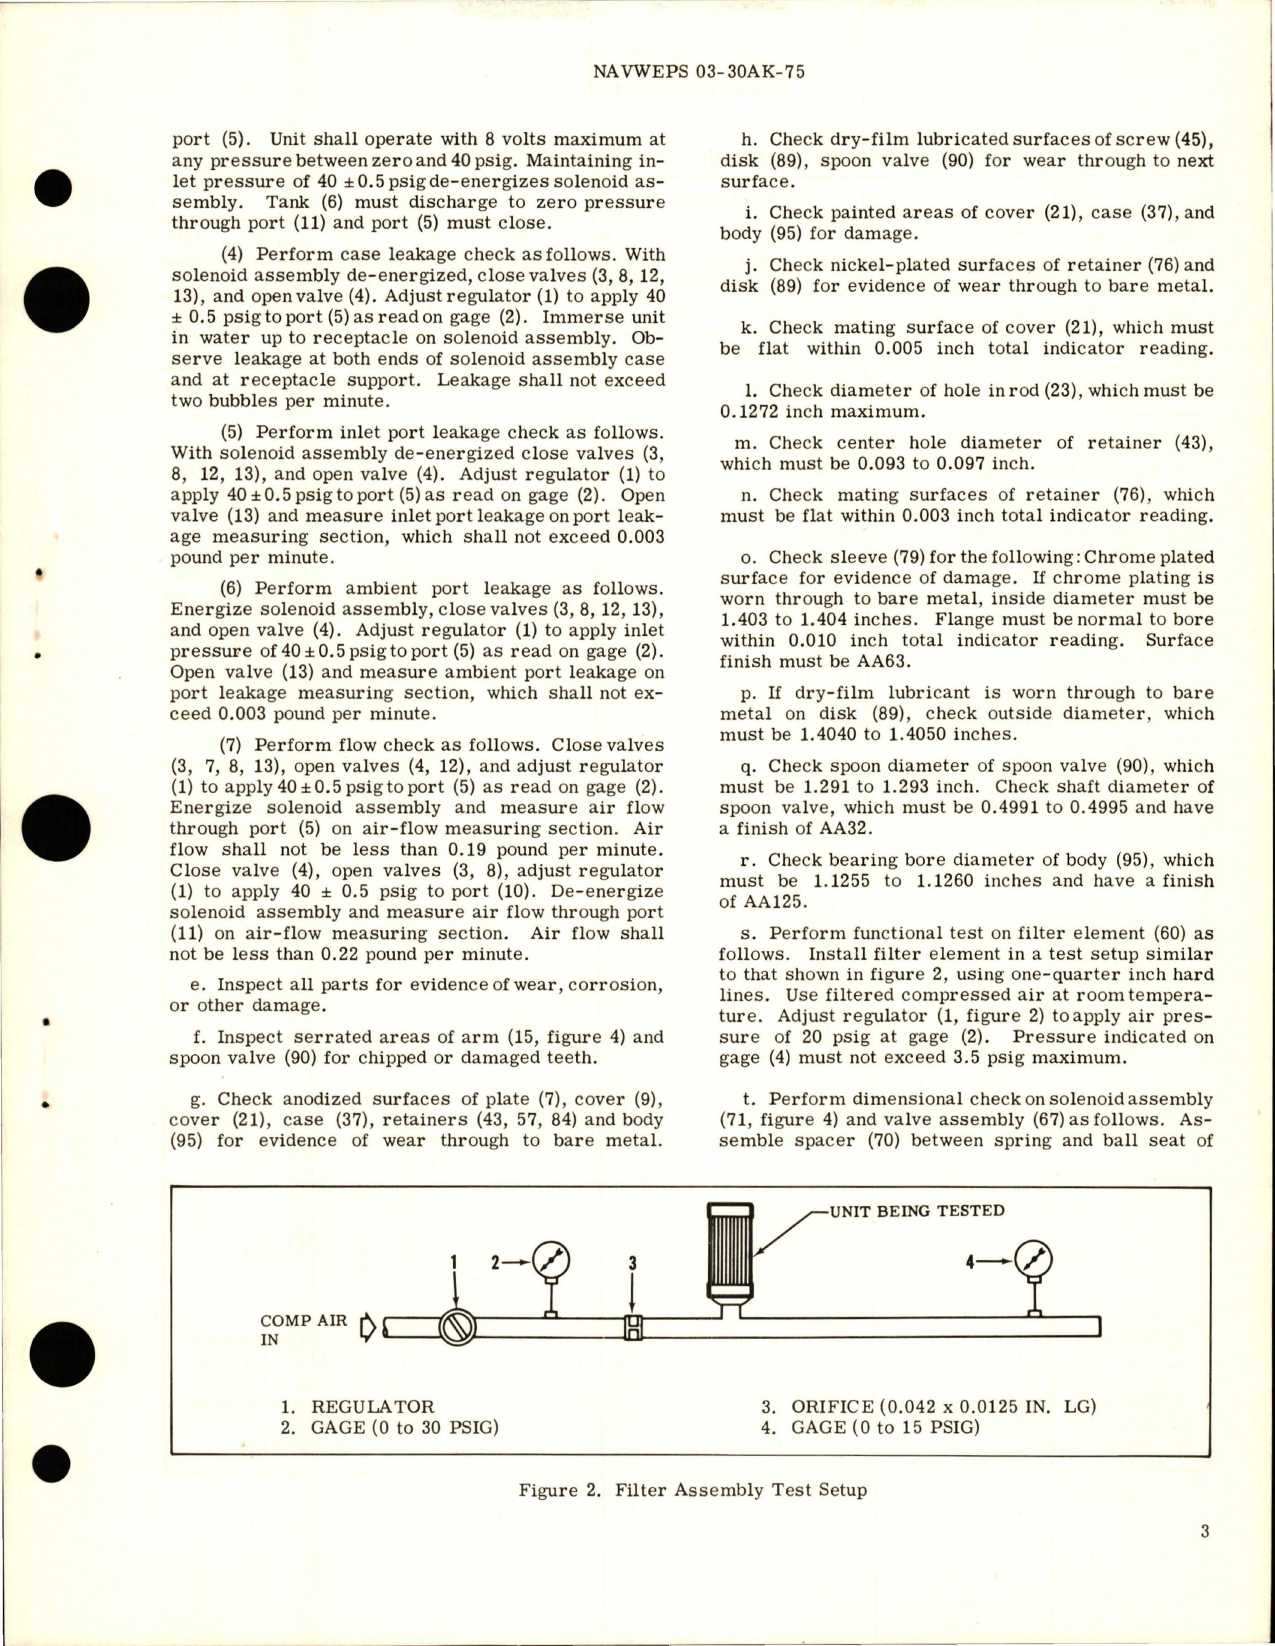 Sample page 5 from AirCorps Library document: Overhaul Instructions with Parts Breakdown for Air Pressure Regulators - Parts 108388, and 108388-1-1 